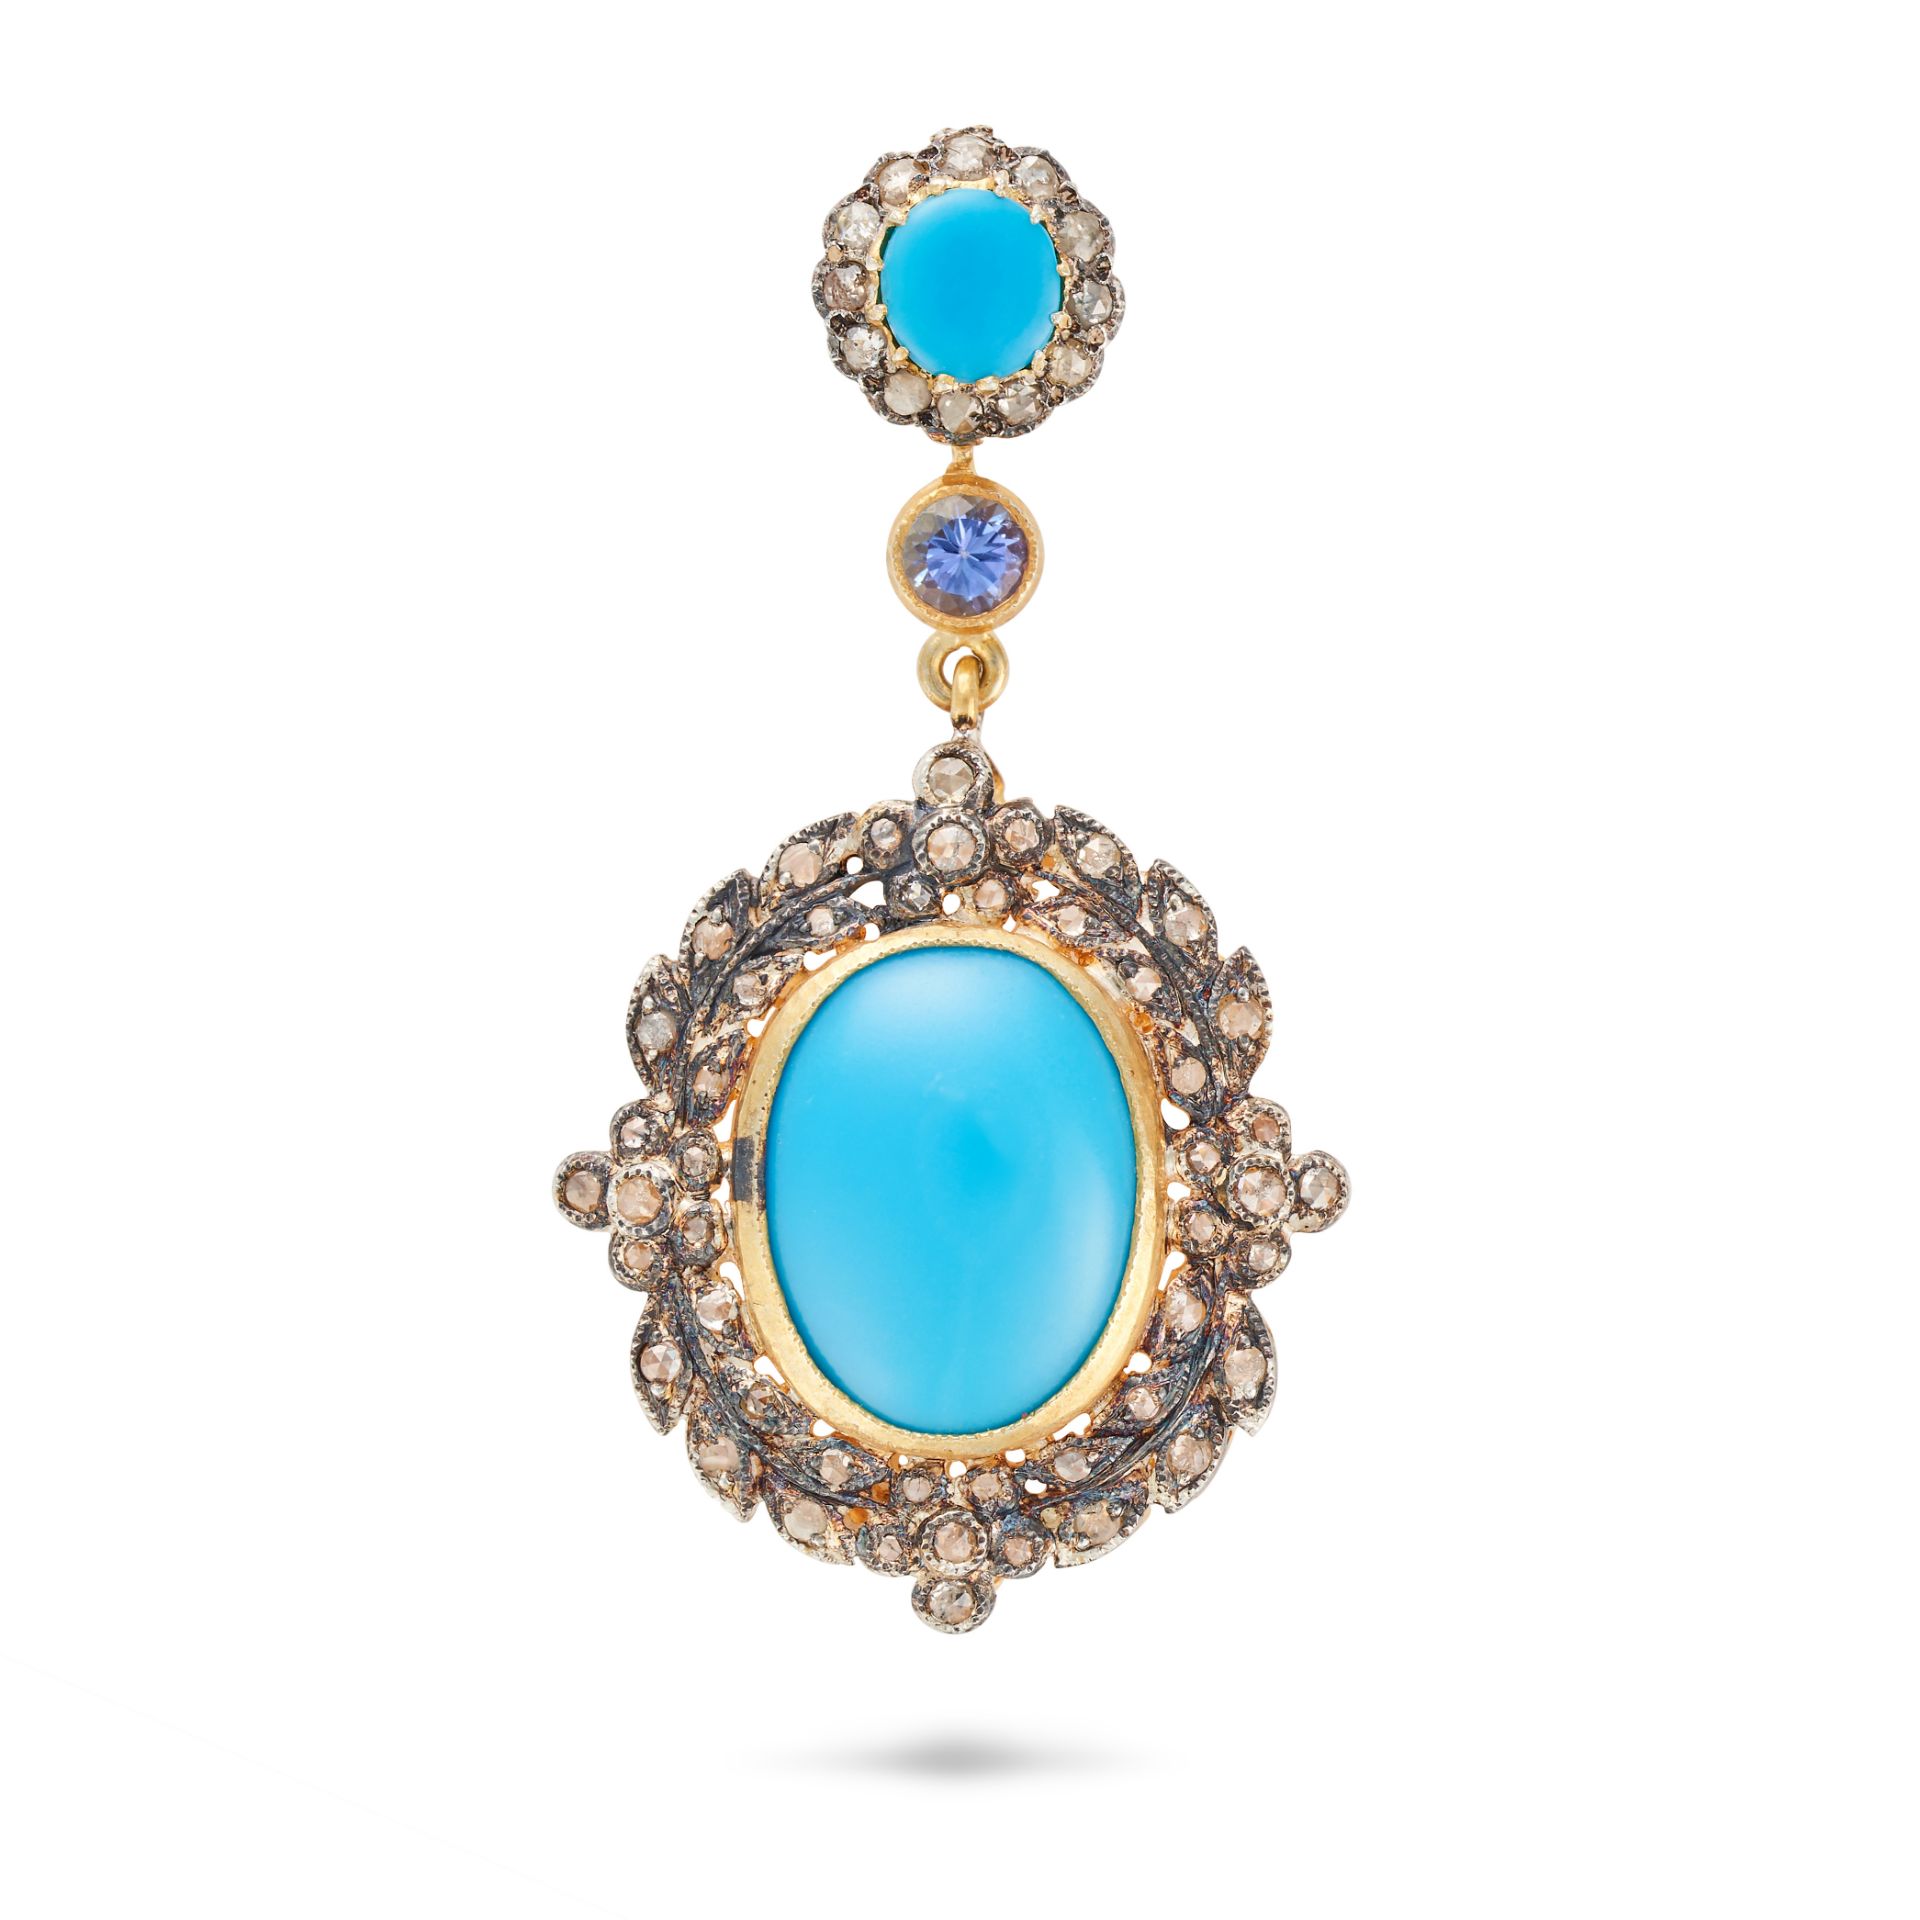 NO RESERVE - A RECONSTITUTED TURQUOISE, DIAMOND AND TANZANITE PENDANT set with an oval cabochon r...